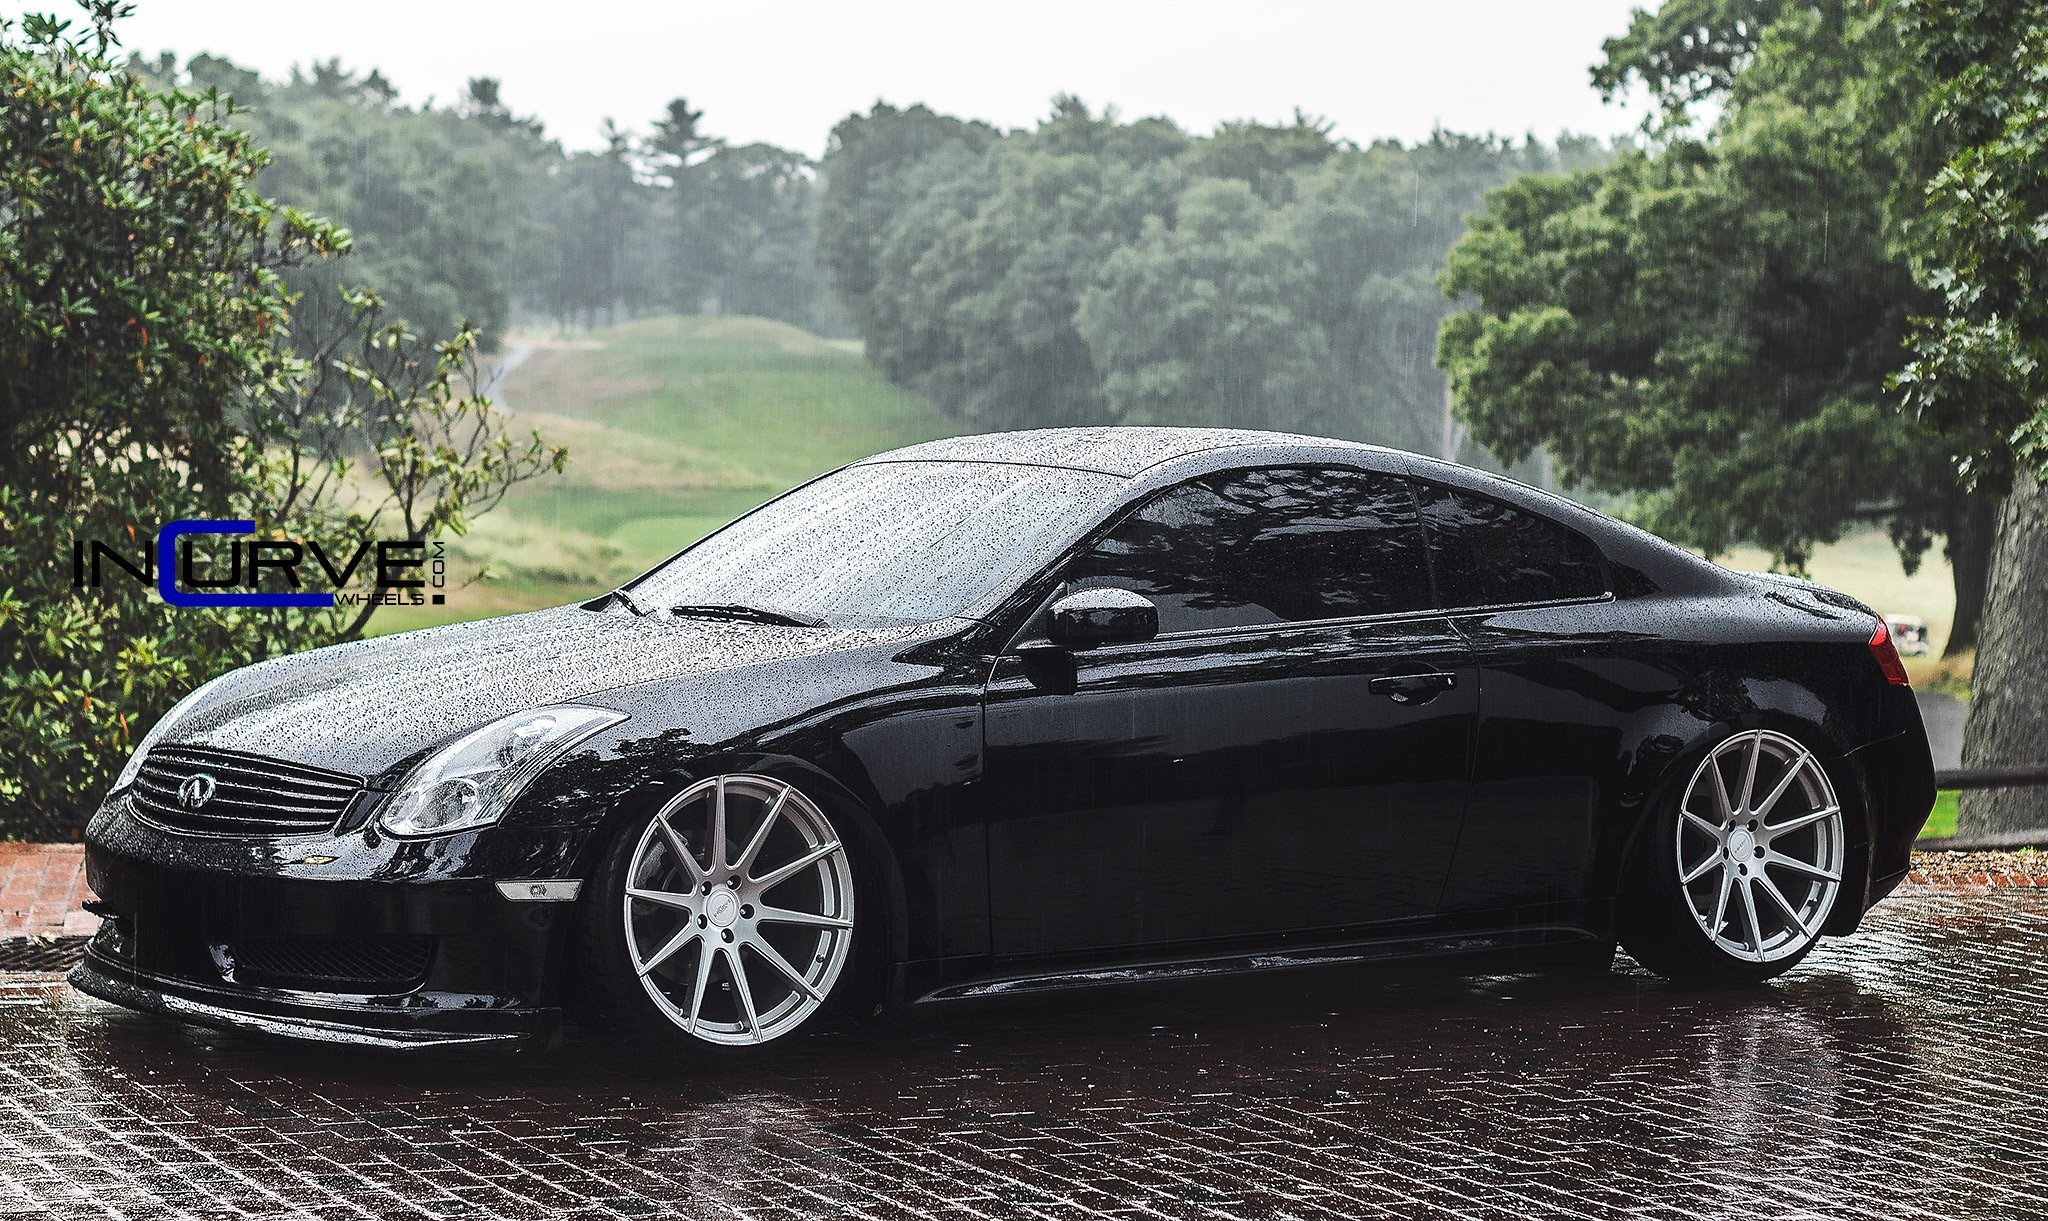 2048x1221 2015 Incurve Wheels cars tuning Infiniti G35 coupe wallpaper